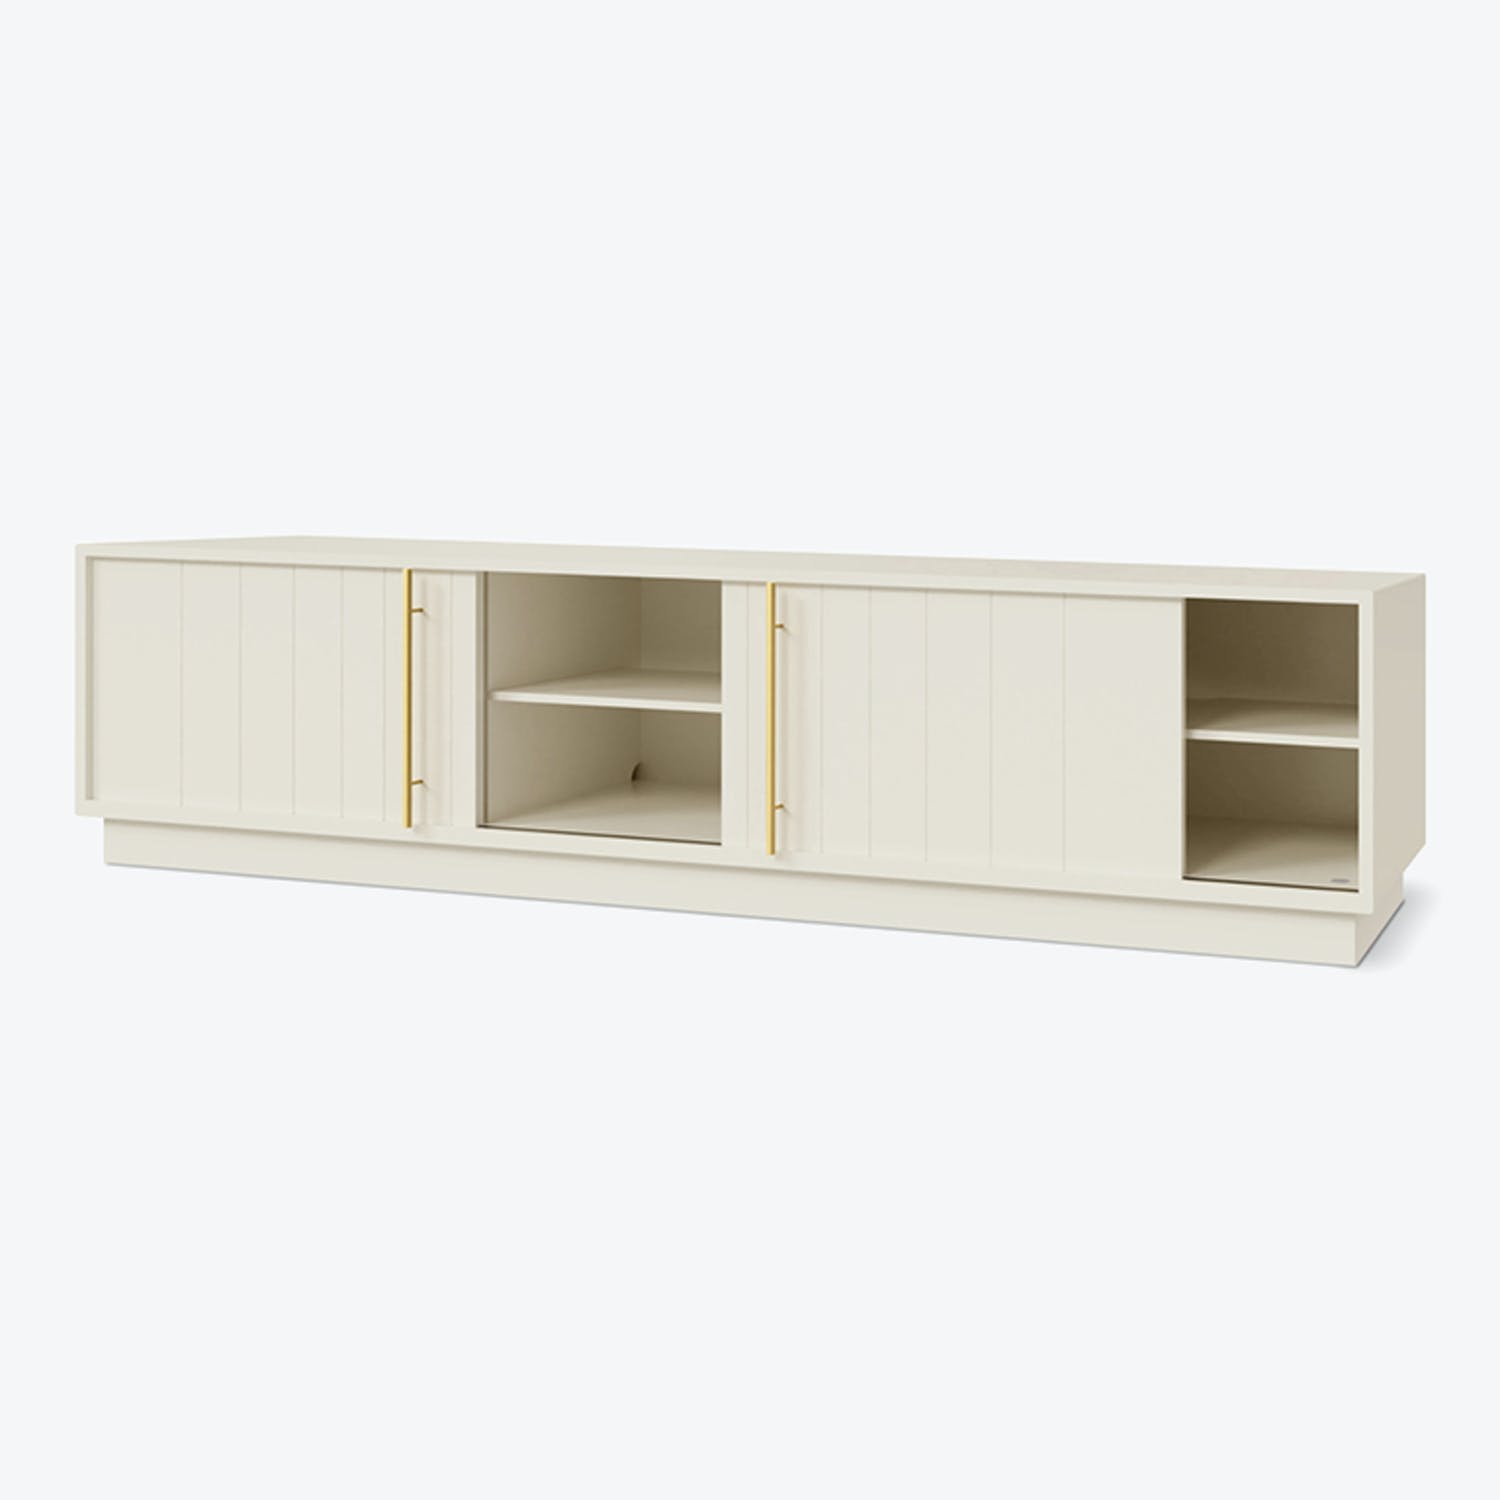 Modern, low-profile wooden TV stand with elegant gold accents and ample storage space.